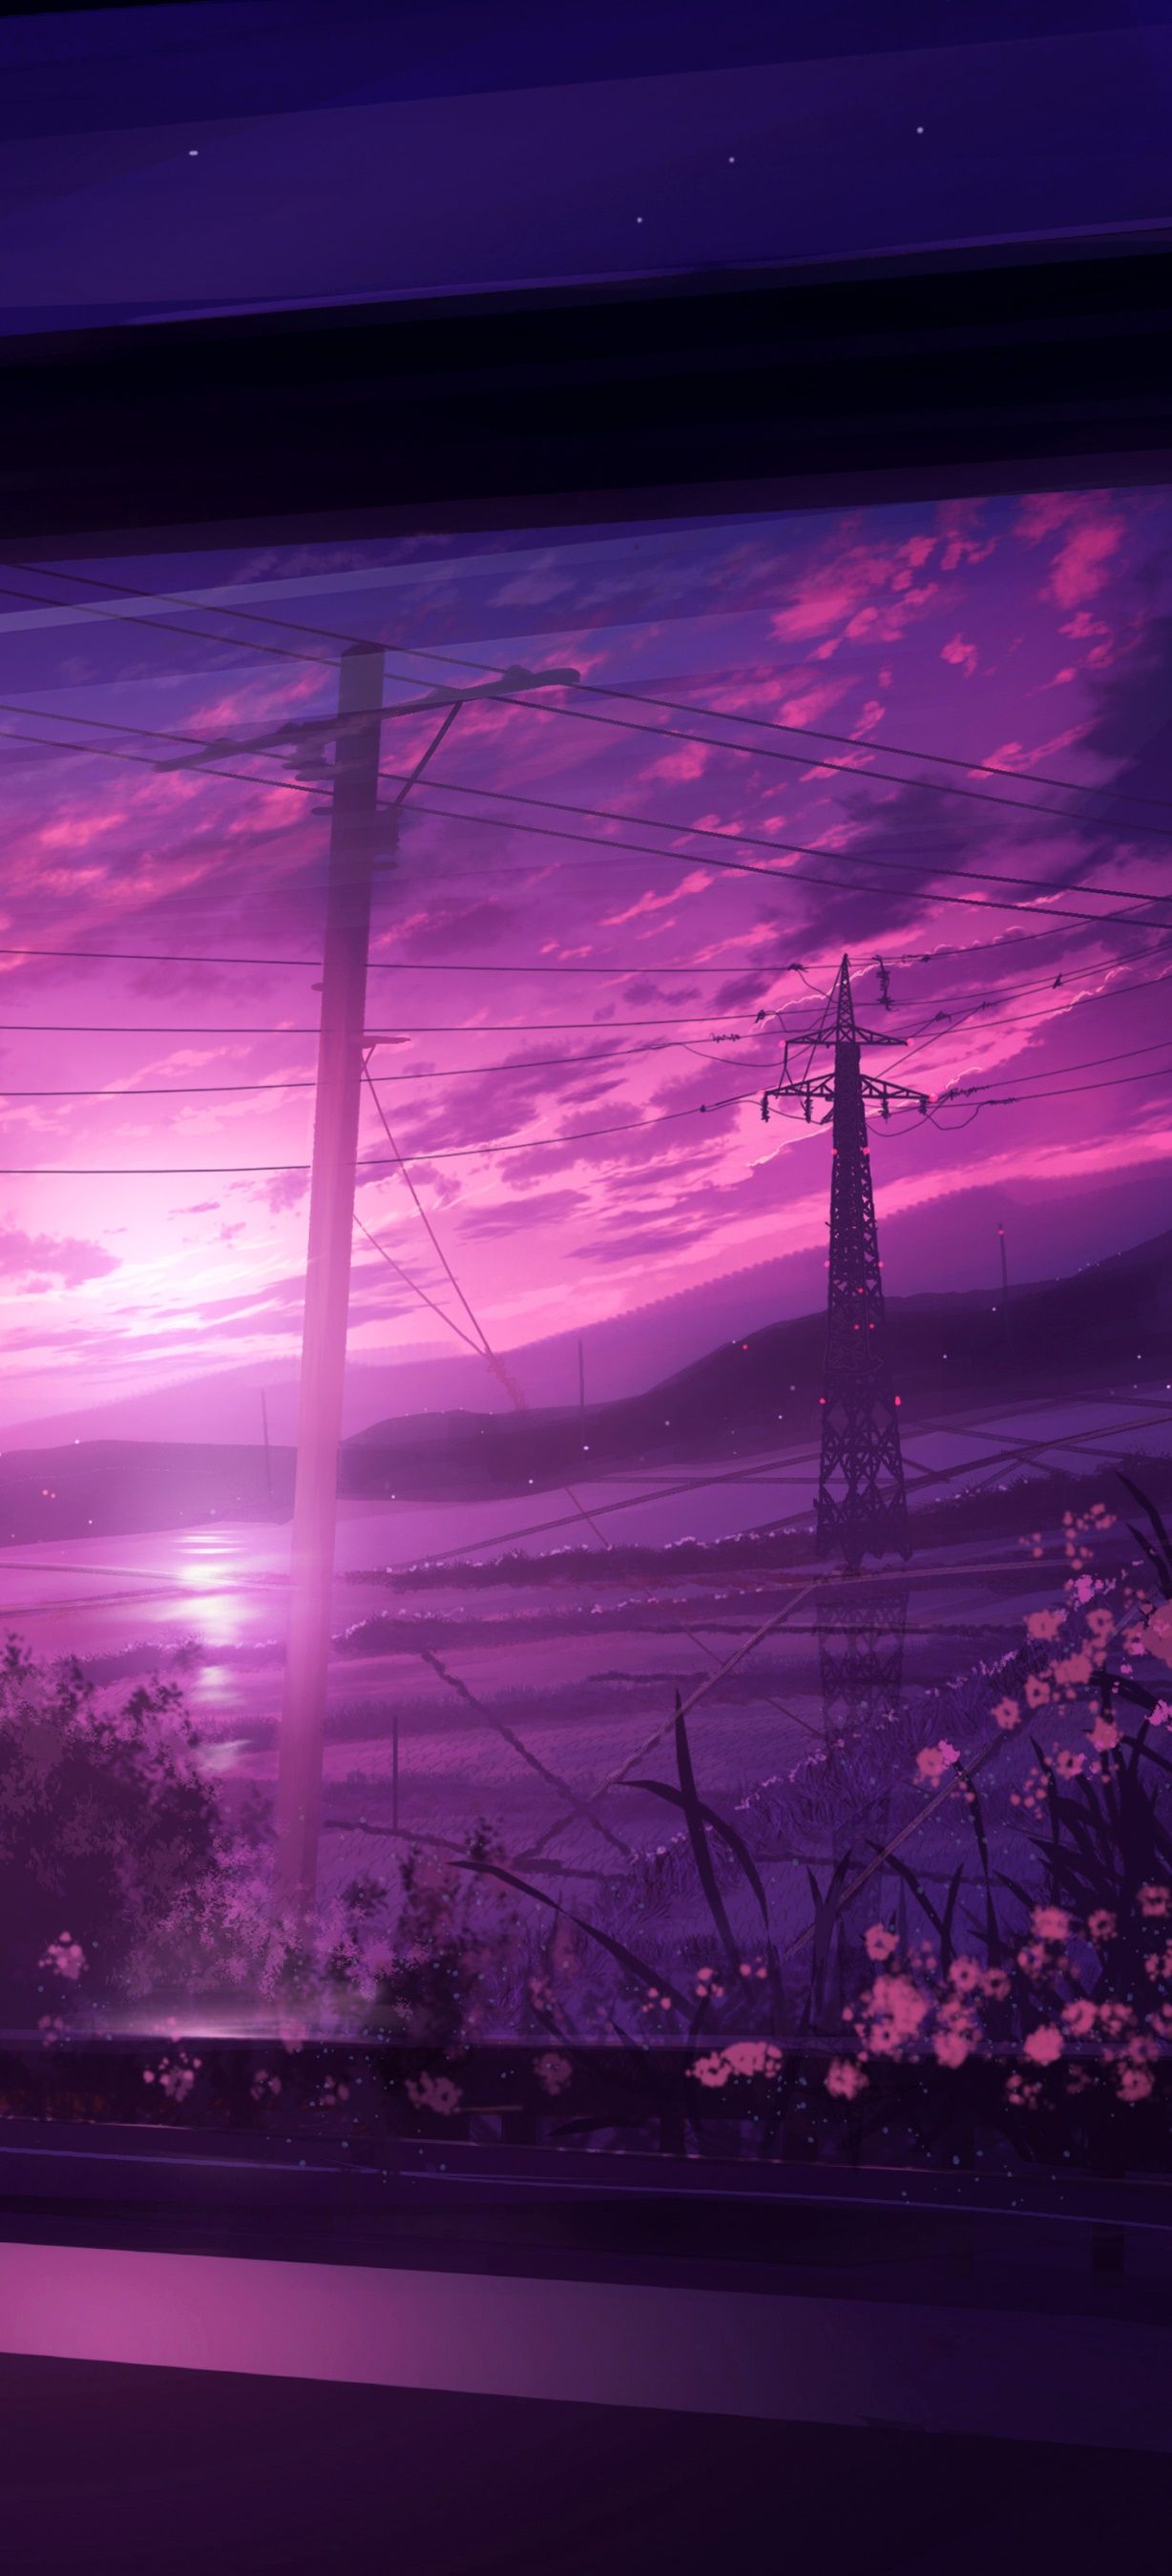 Aesthetic anime wallpaper phone background of a sunset over a power line - Anime sunset